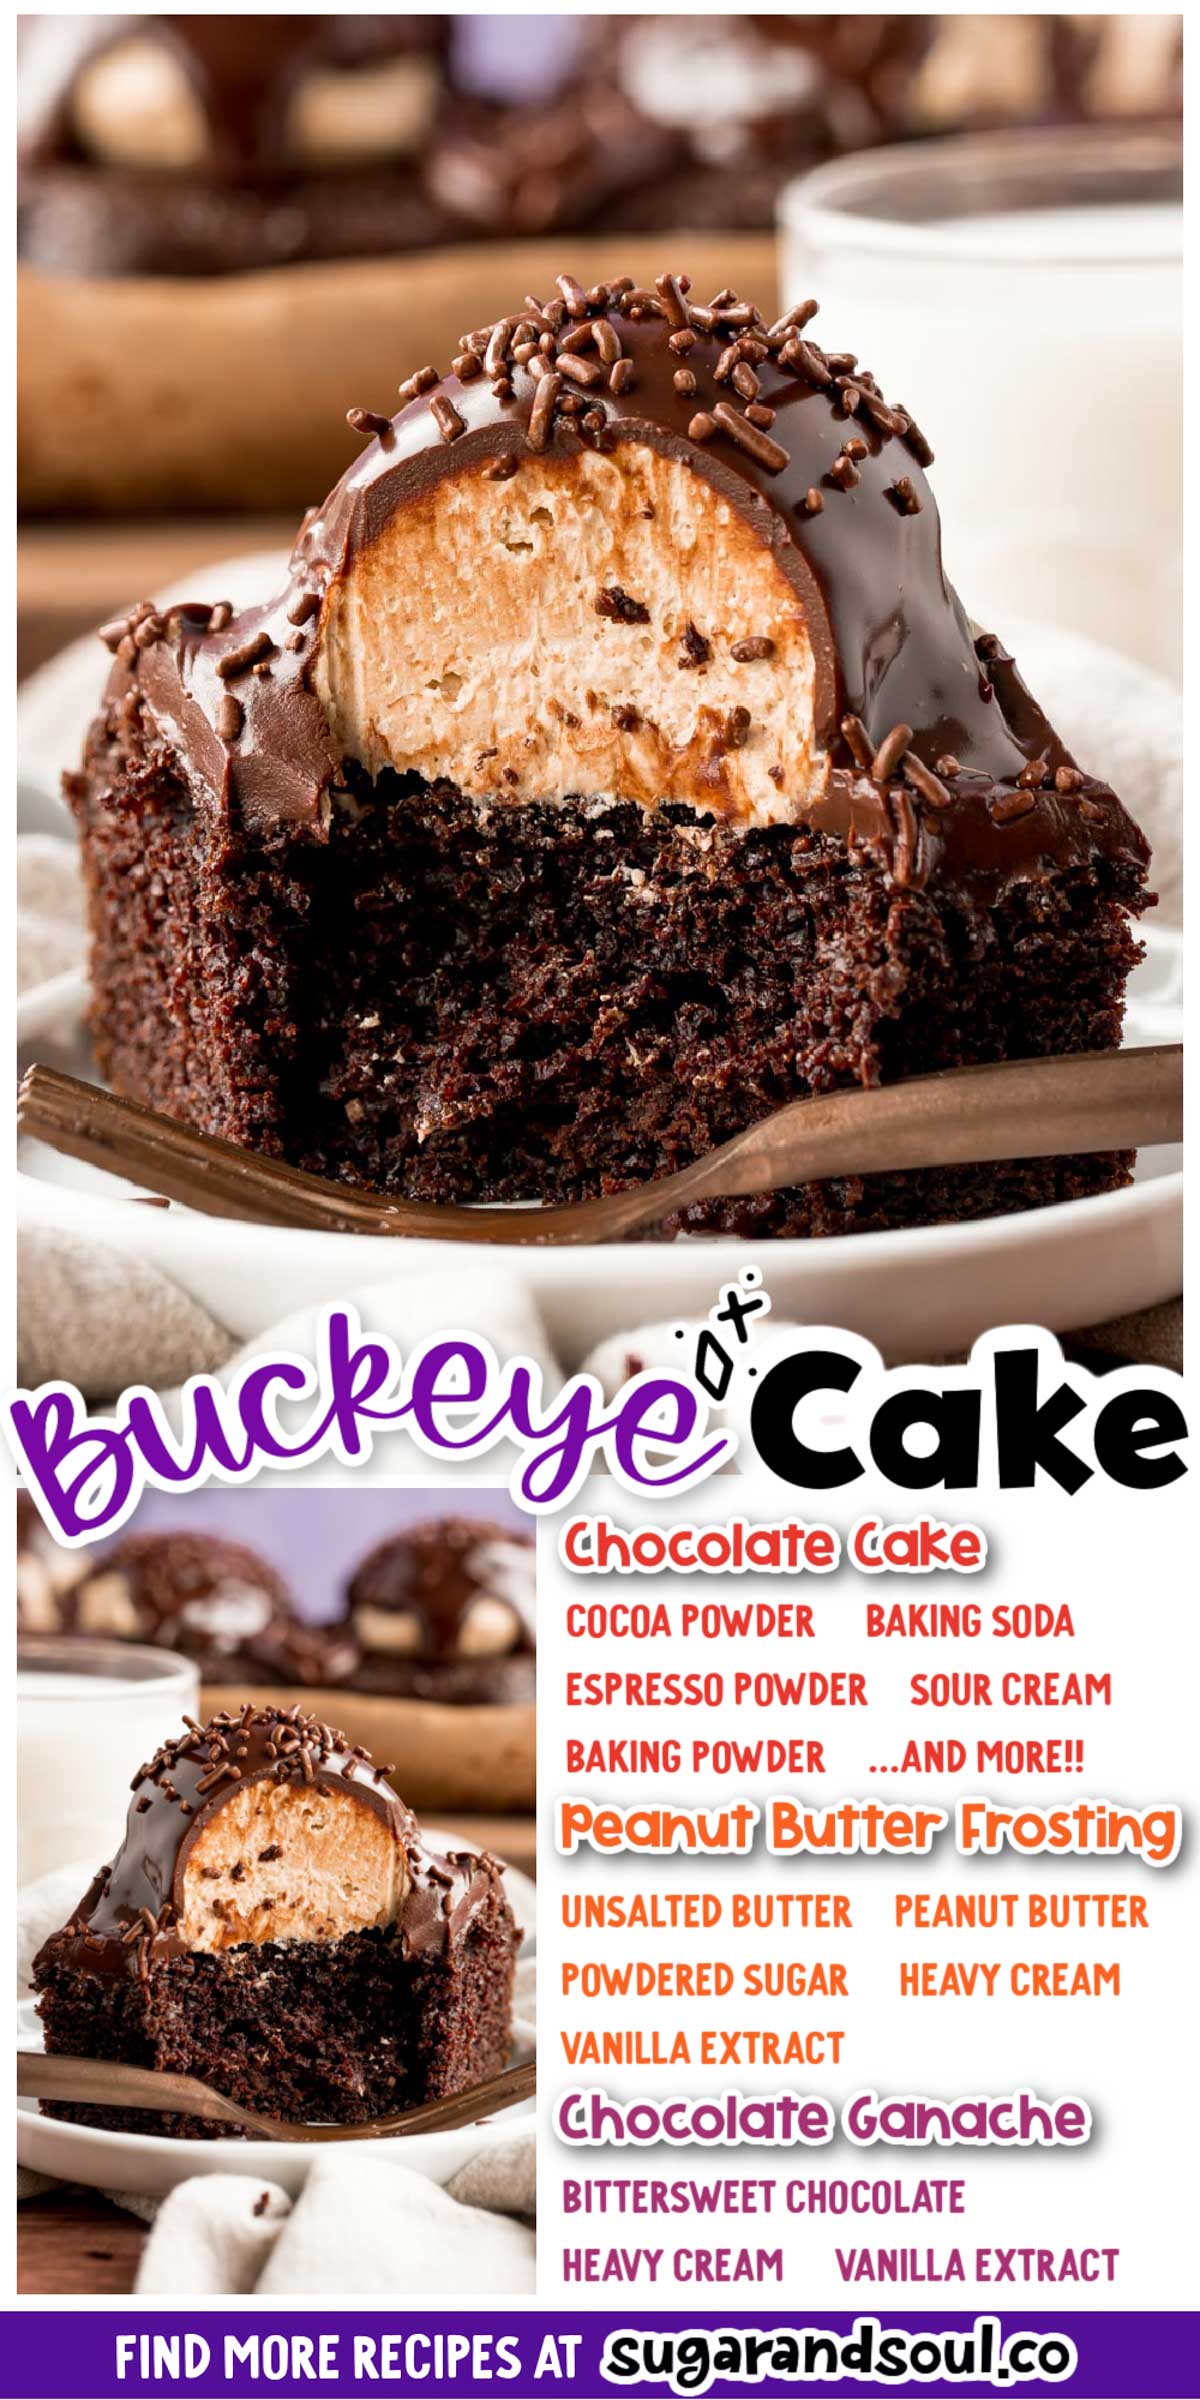 Buckeye Cake is a rich, decadent dessert that has homemade chocolate cake with mounds of peanut butter frosting on top with a layer of ganache! Serves a crowd yet only calls for 30 minutes of prep time! via @sugarandsoulco